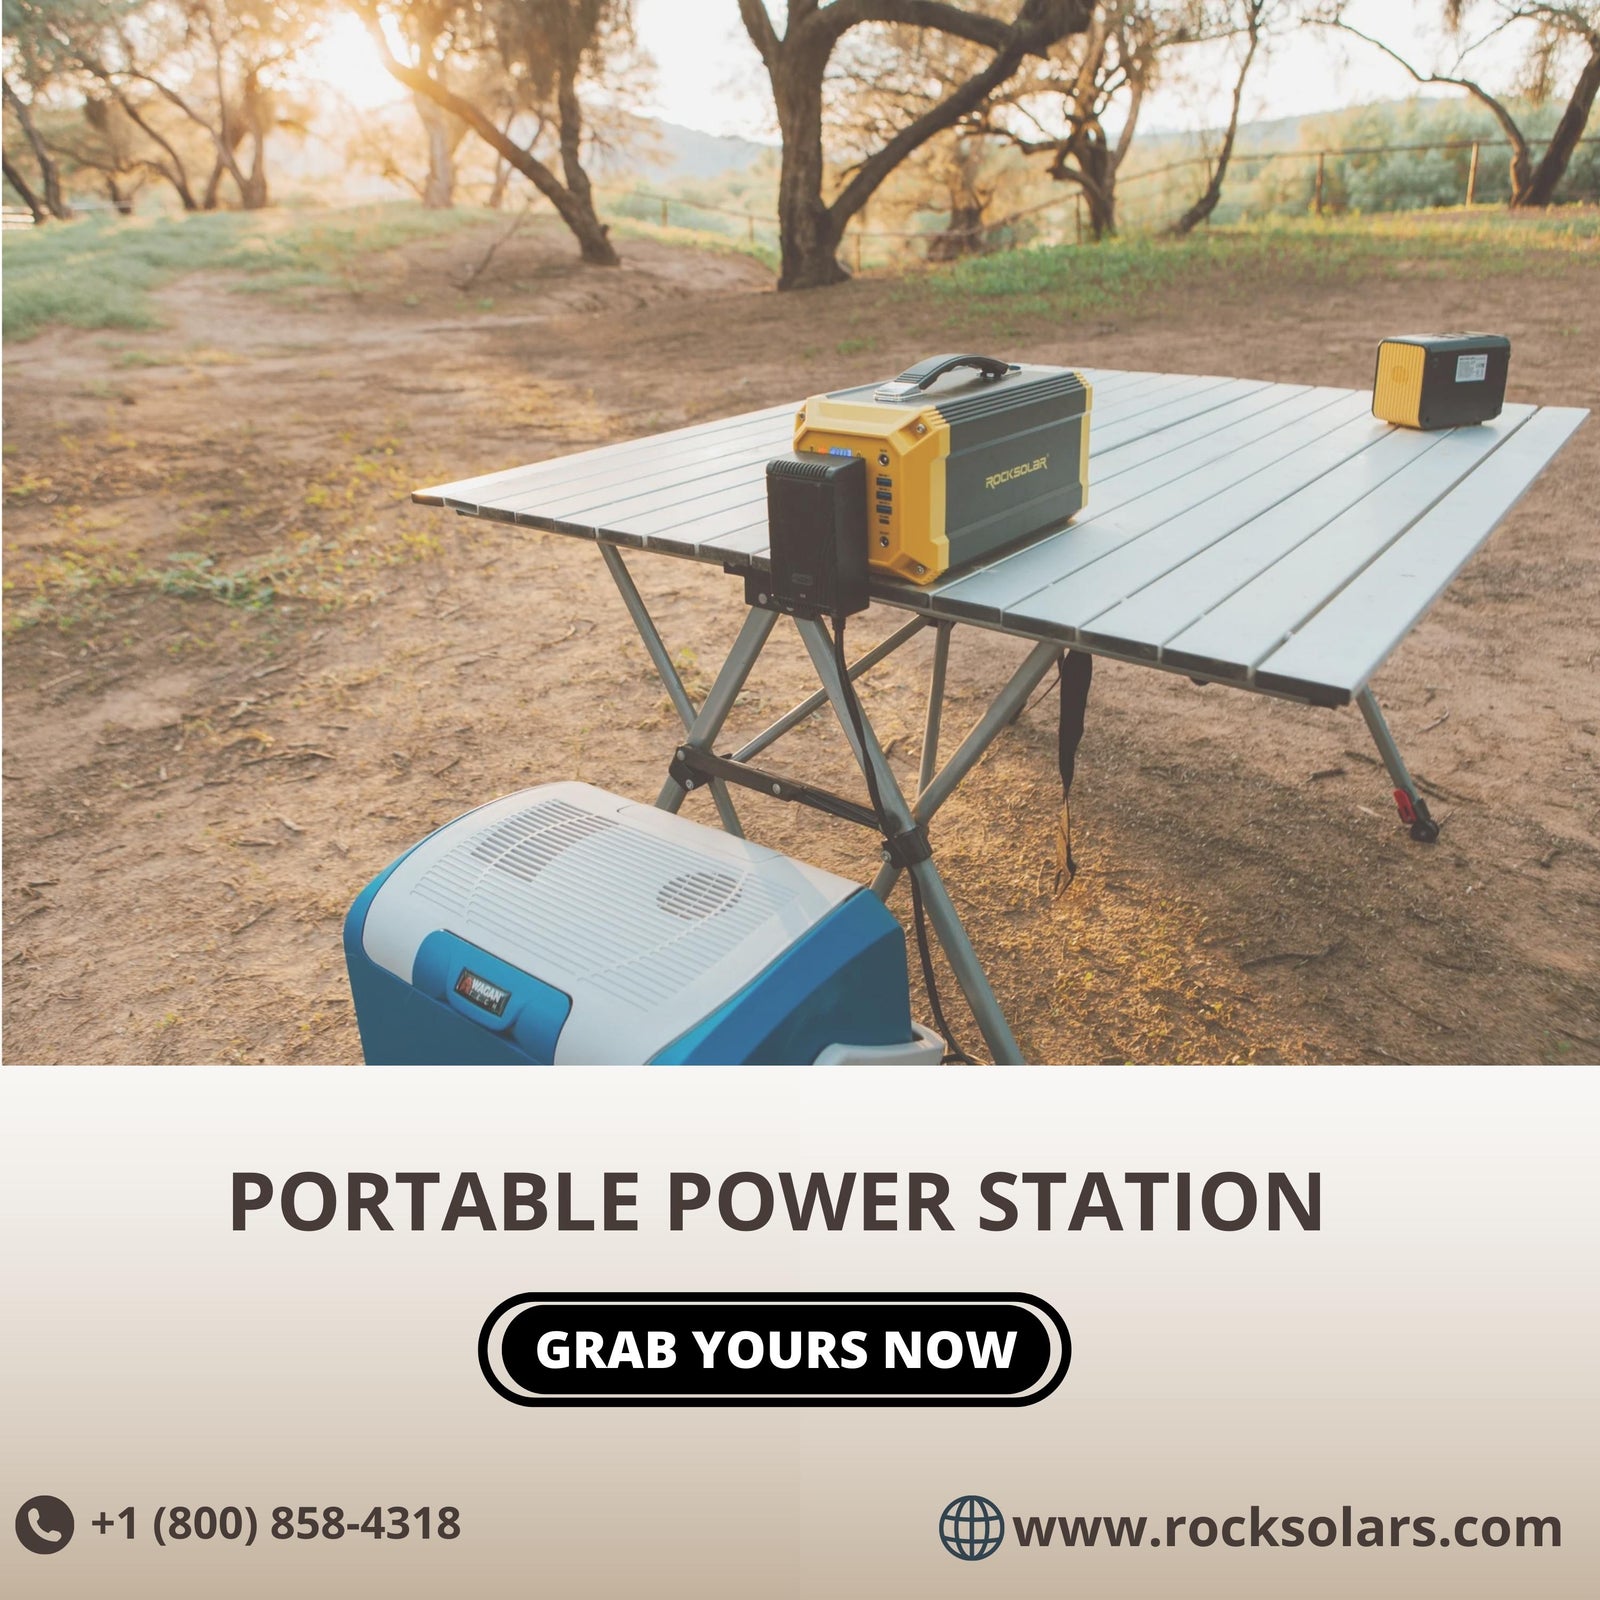 How to Choose the Best Portable Power Station